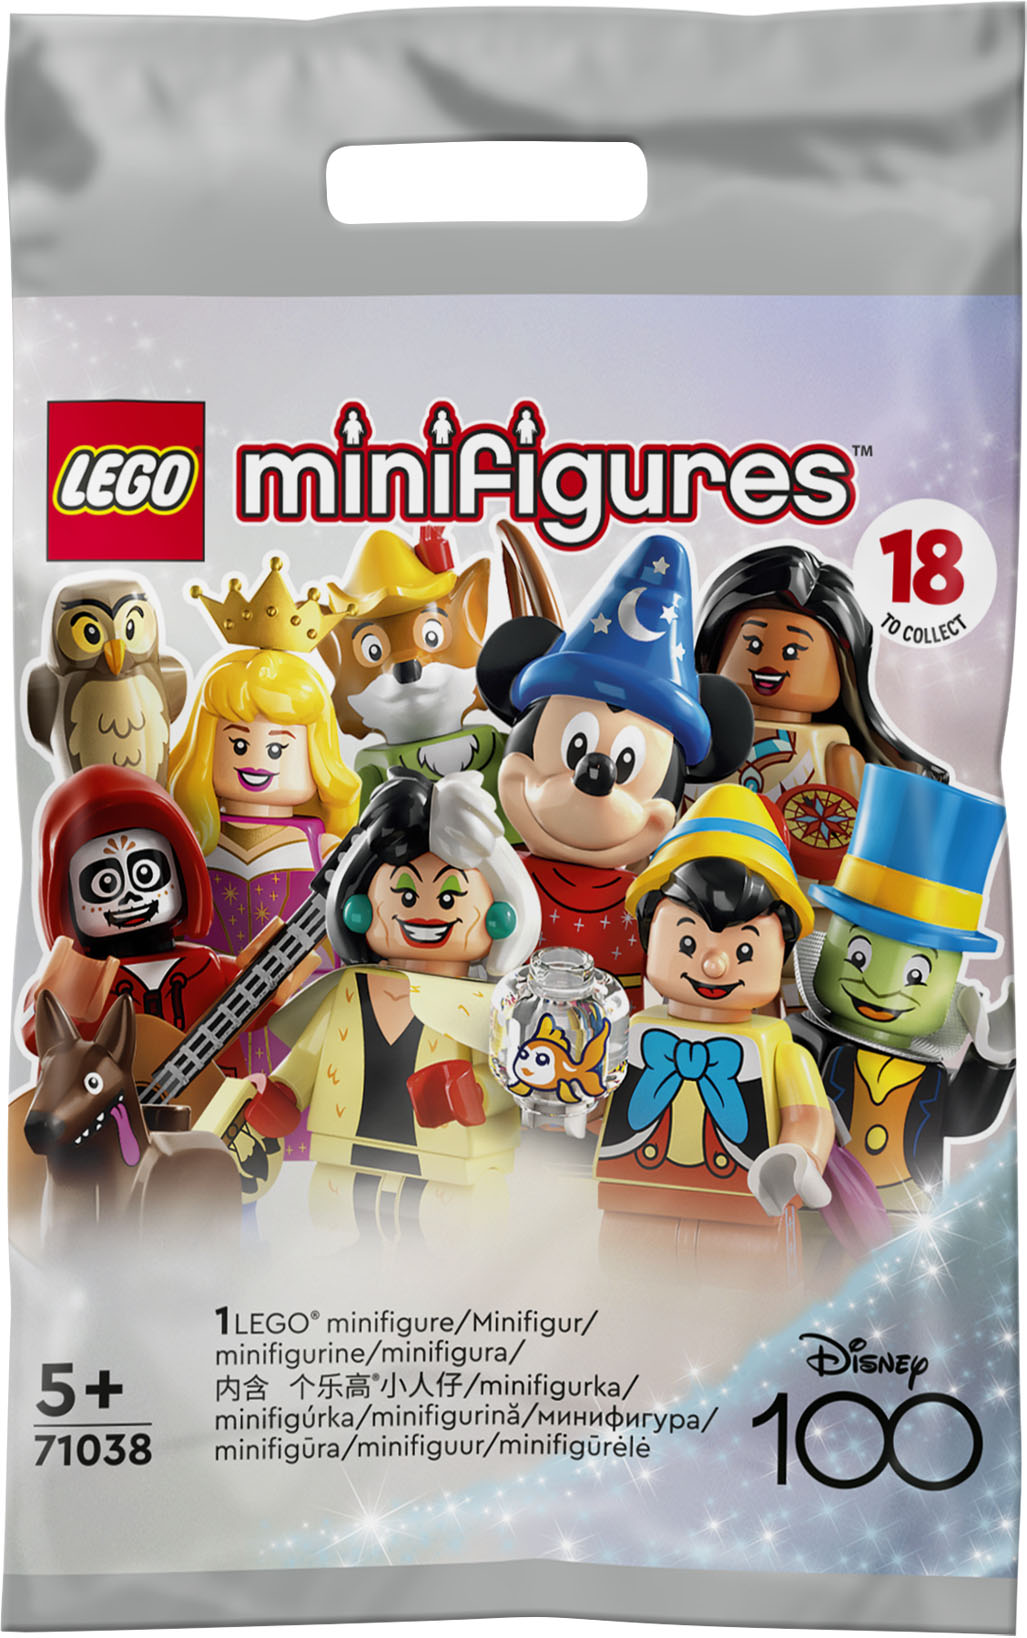 LEGO Disney Minifigures (71038) Officially Revealed - The Brick Fan